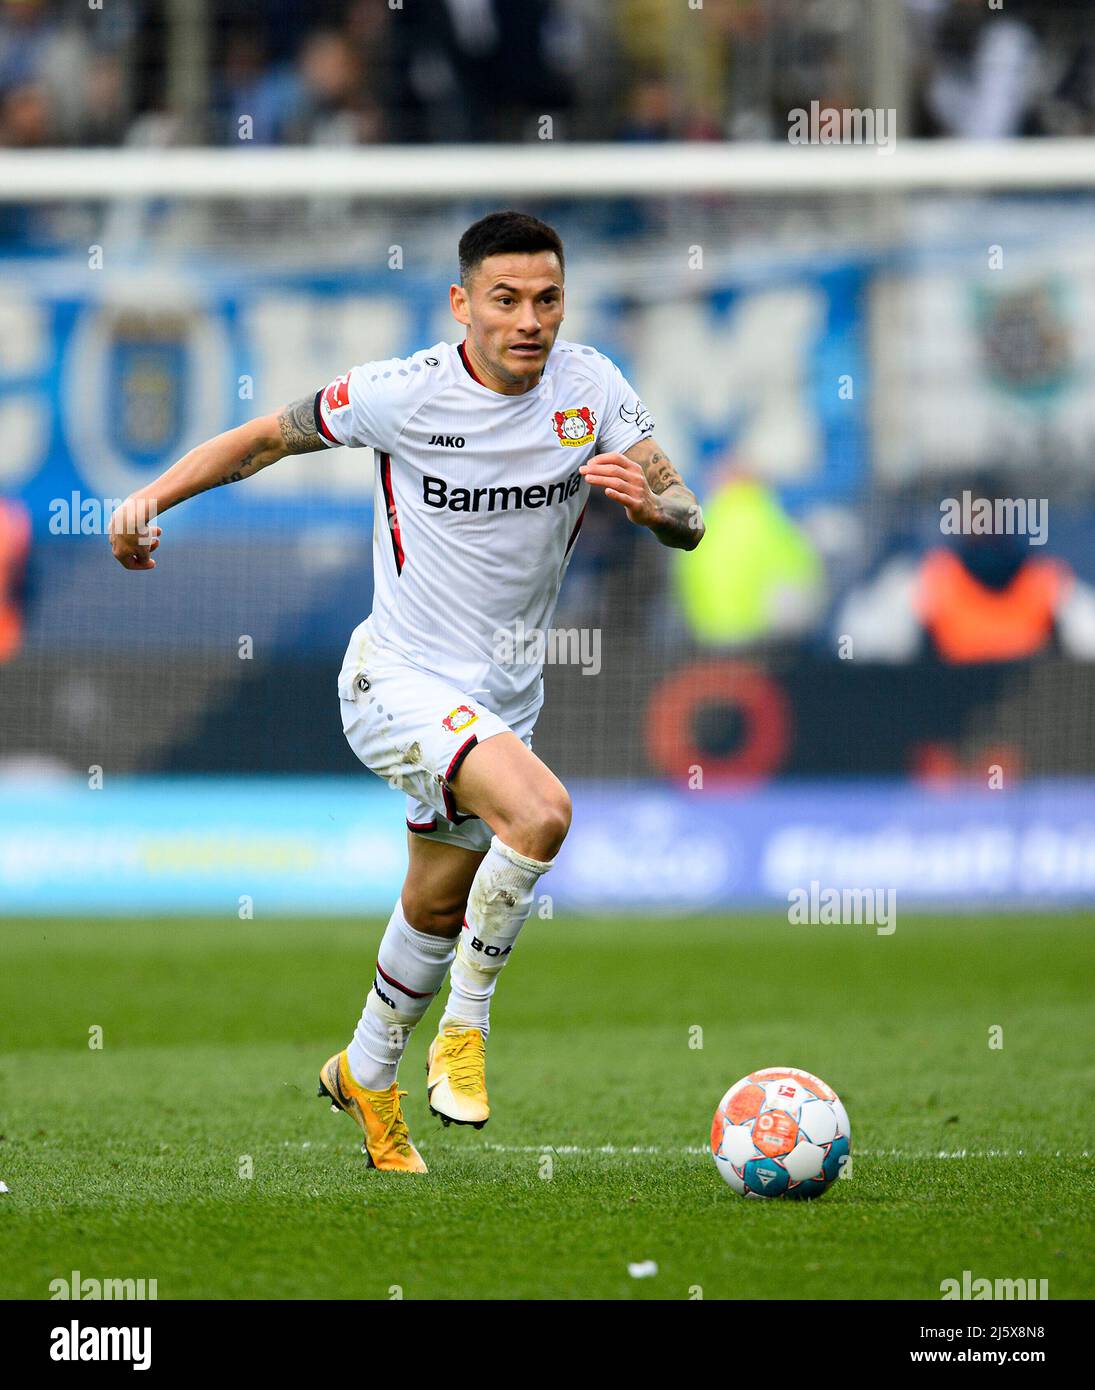 Charles ARANGUIZ (LEV) action, soccer 1st Bundesliga, 29th matchday, VfL Bochum (BO) - Bayer 04 Leverkusen (LEV) 0: 0, on March 10th, 2022 in Bochum/Germany. #DFL regulations prohibit any use of photographs as image sequences and/or quasi-video # Â Stock Photo